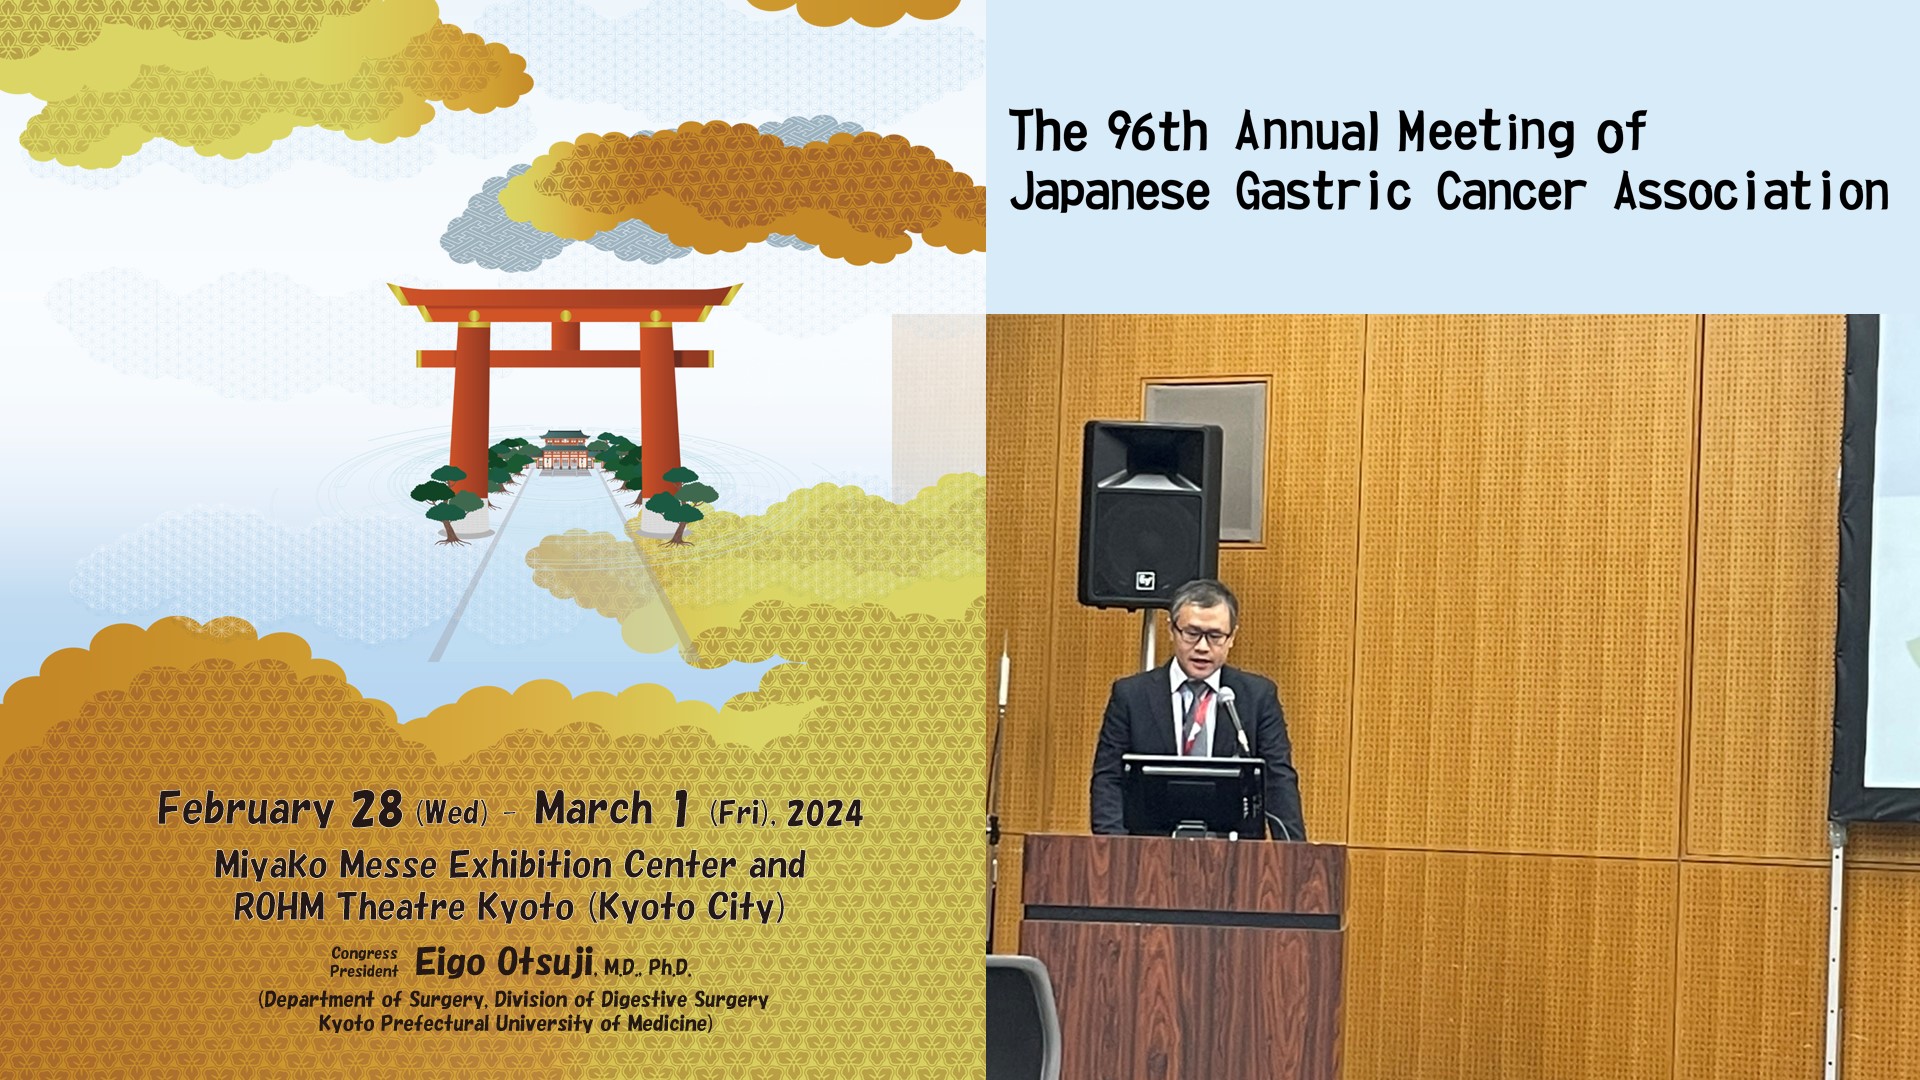 Siriraj Faculty Abroad at the 96th Annual Meeting of Japanese Gastric Cancer Association